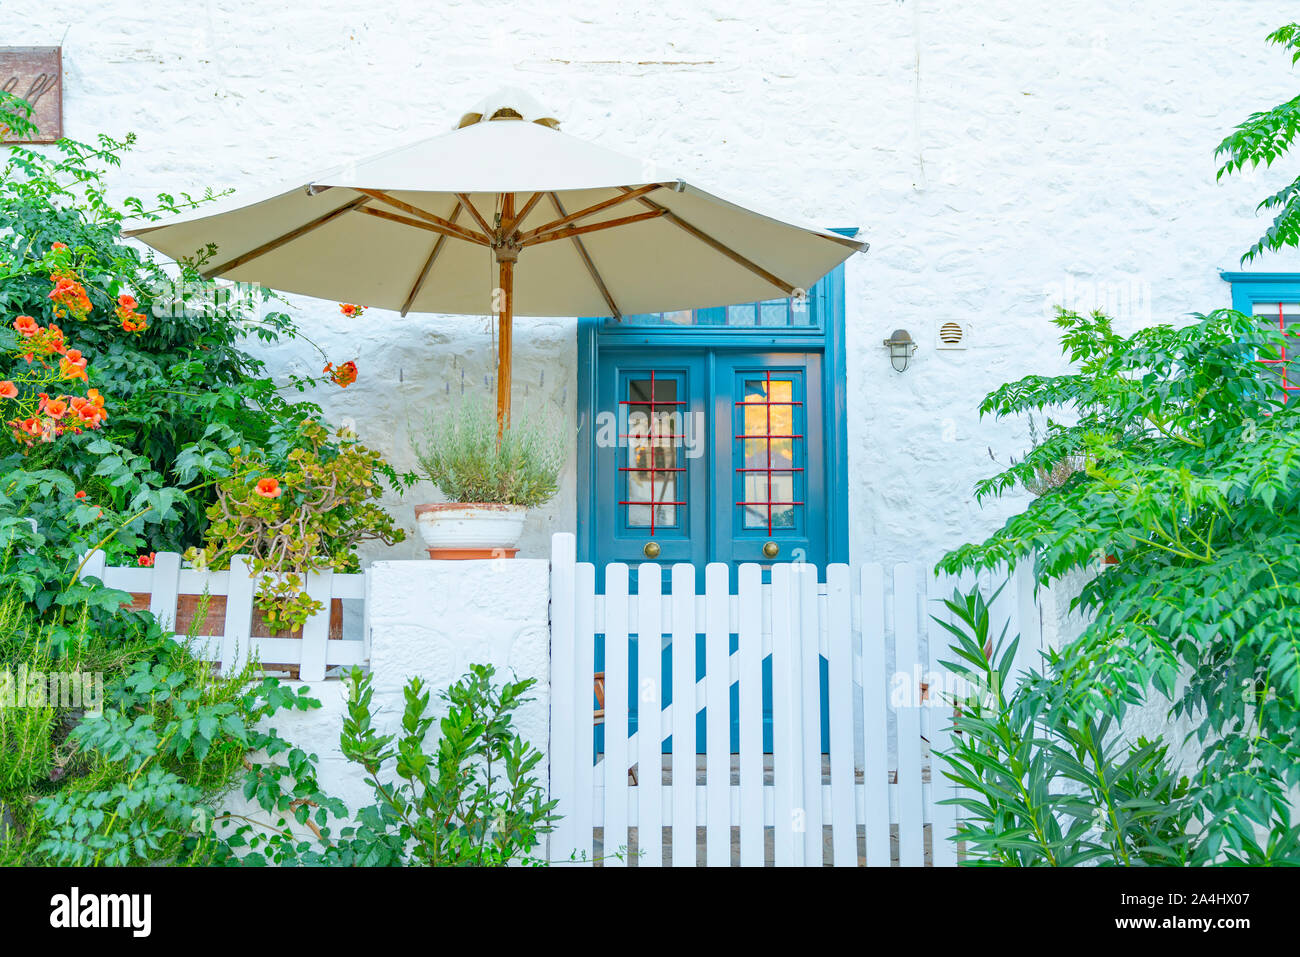 Blue front door under shade umbrella with quaint white fence, gate and garden photographed from street. Stock Photo